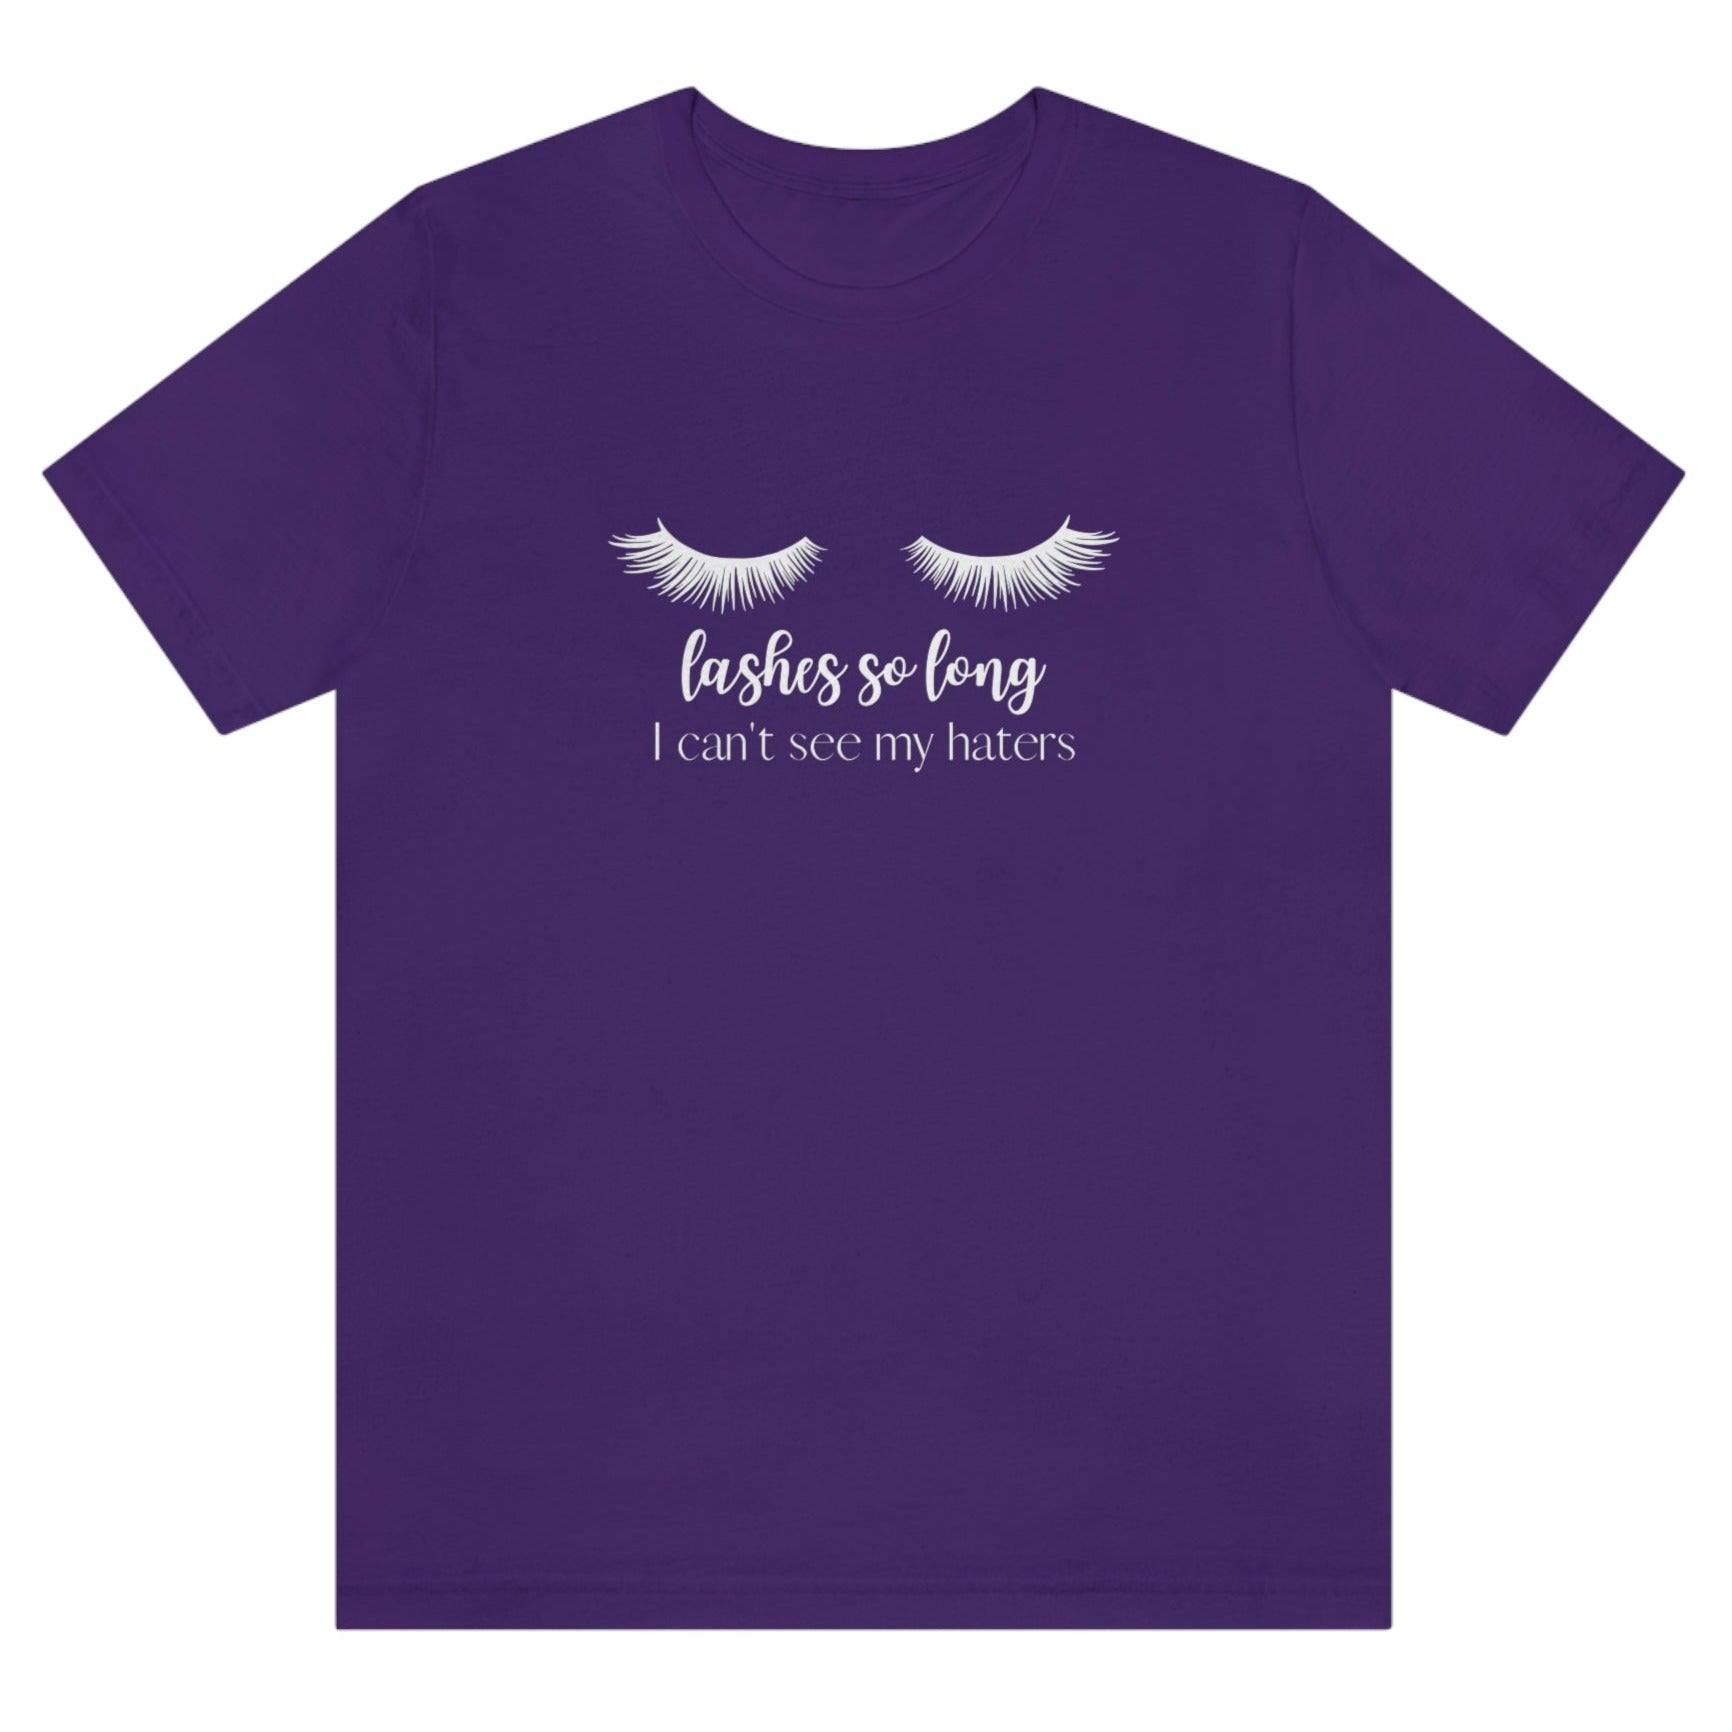 lashes-so-long-i-cant-see-my-haters-team-purple-t-shirt-womens